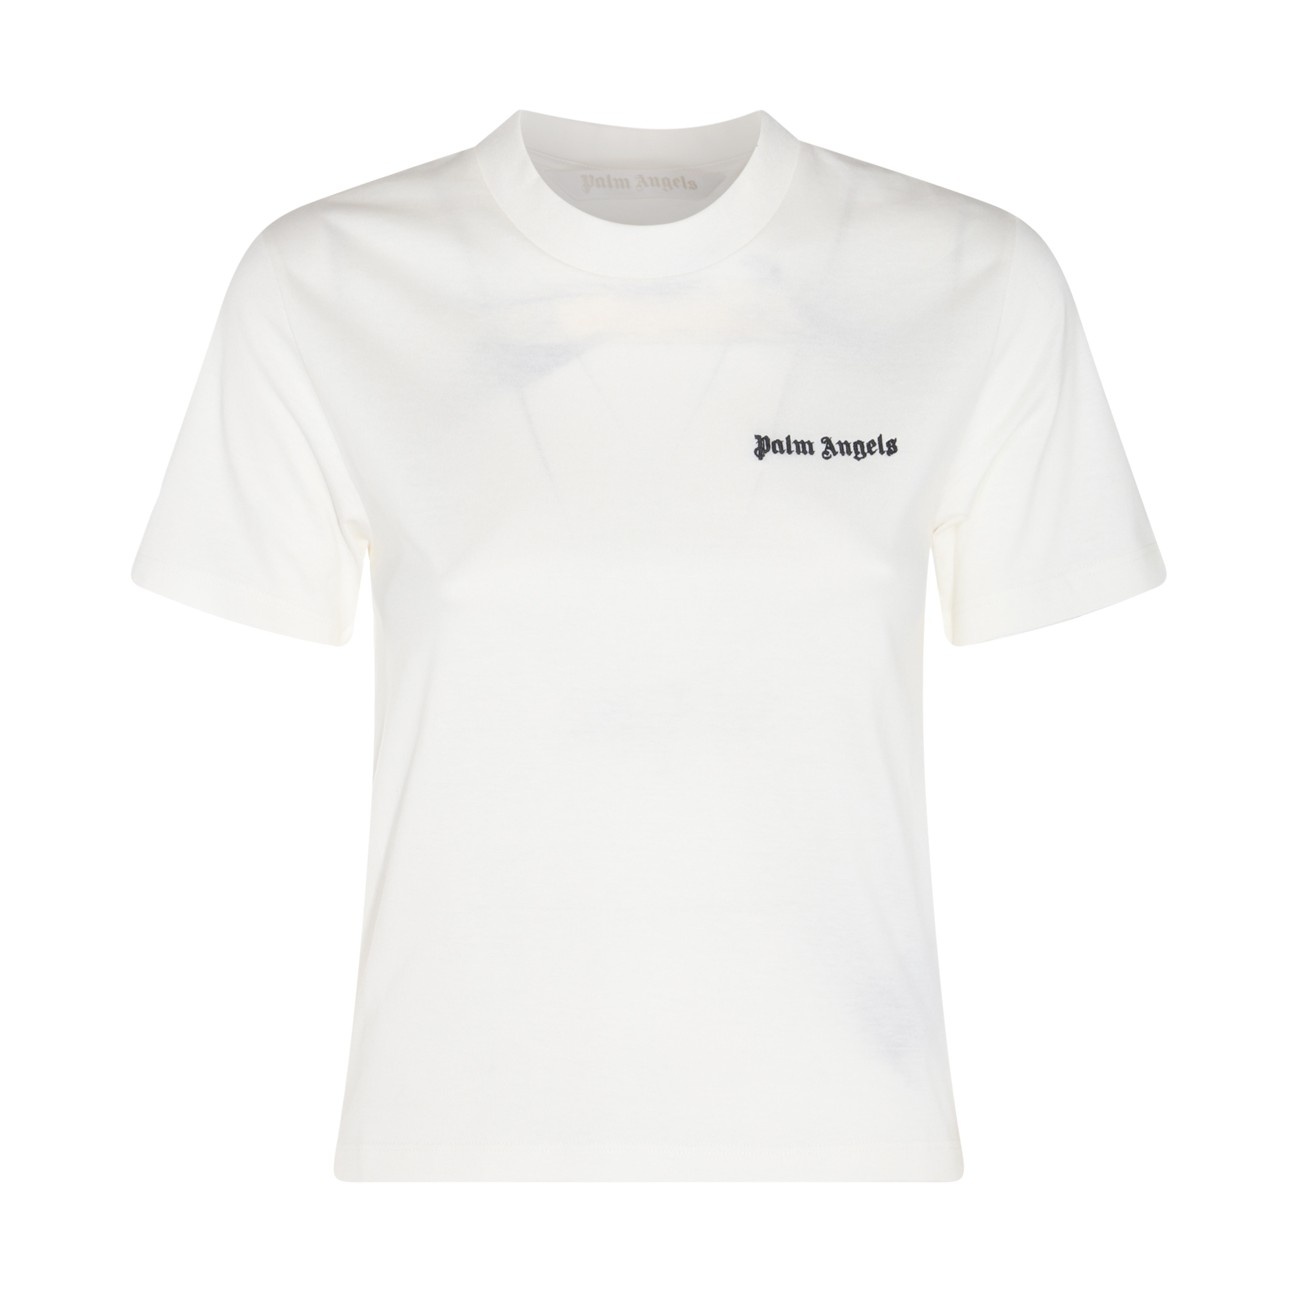 white and black cotton t-shirt - 1